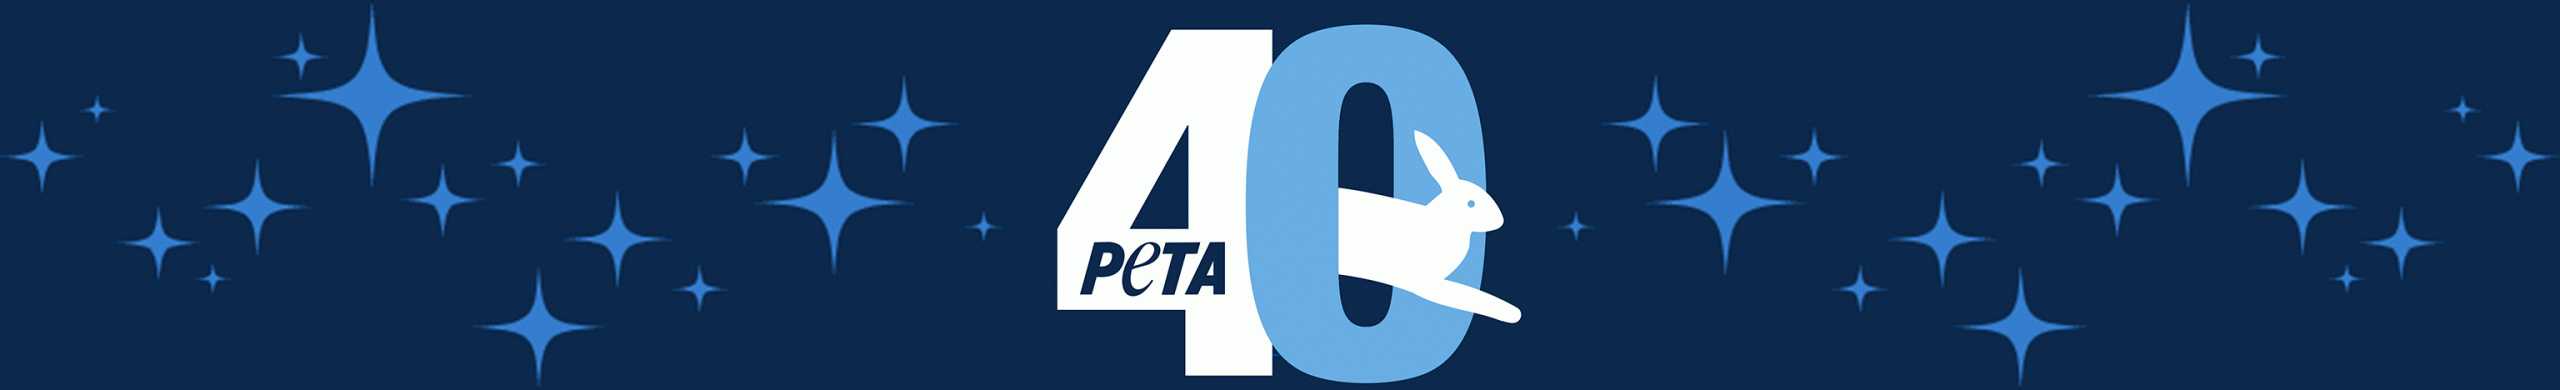 PETA's 40th Anniversary and Holiday Party